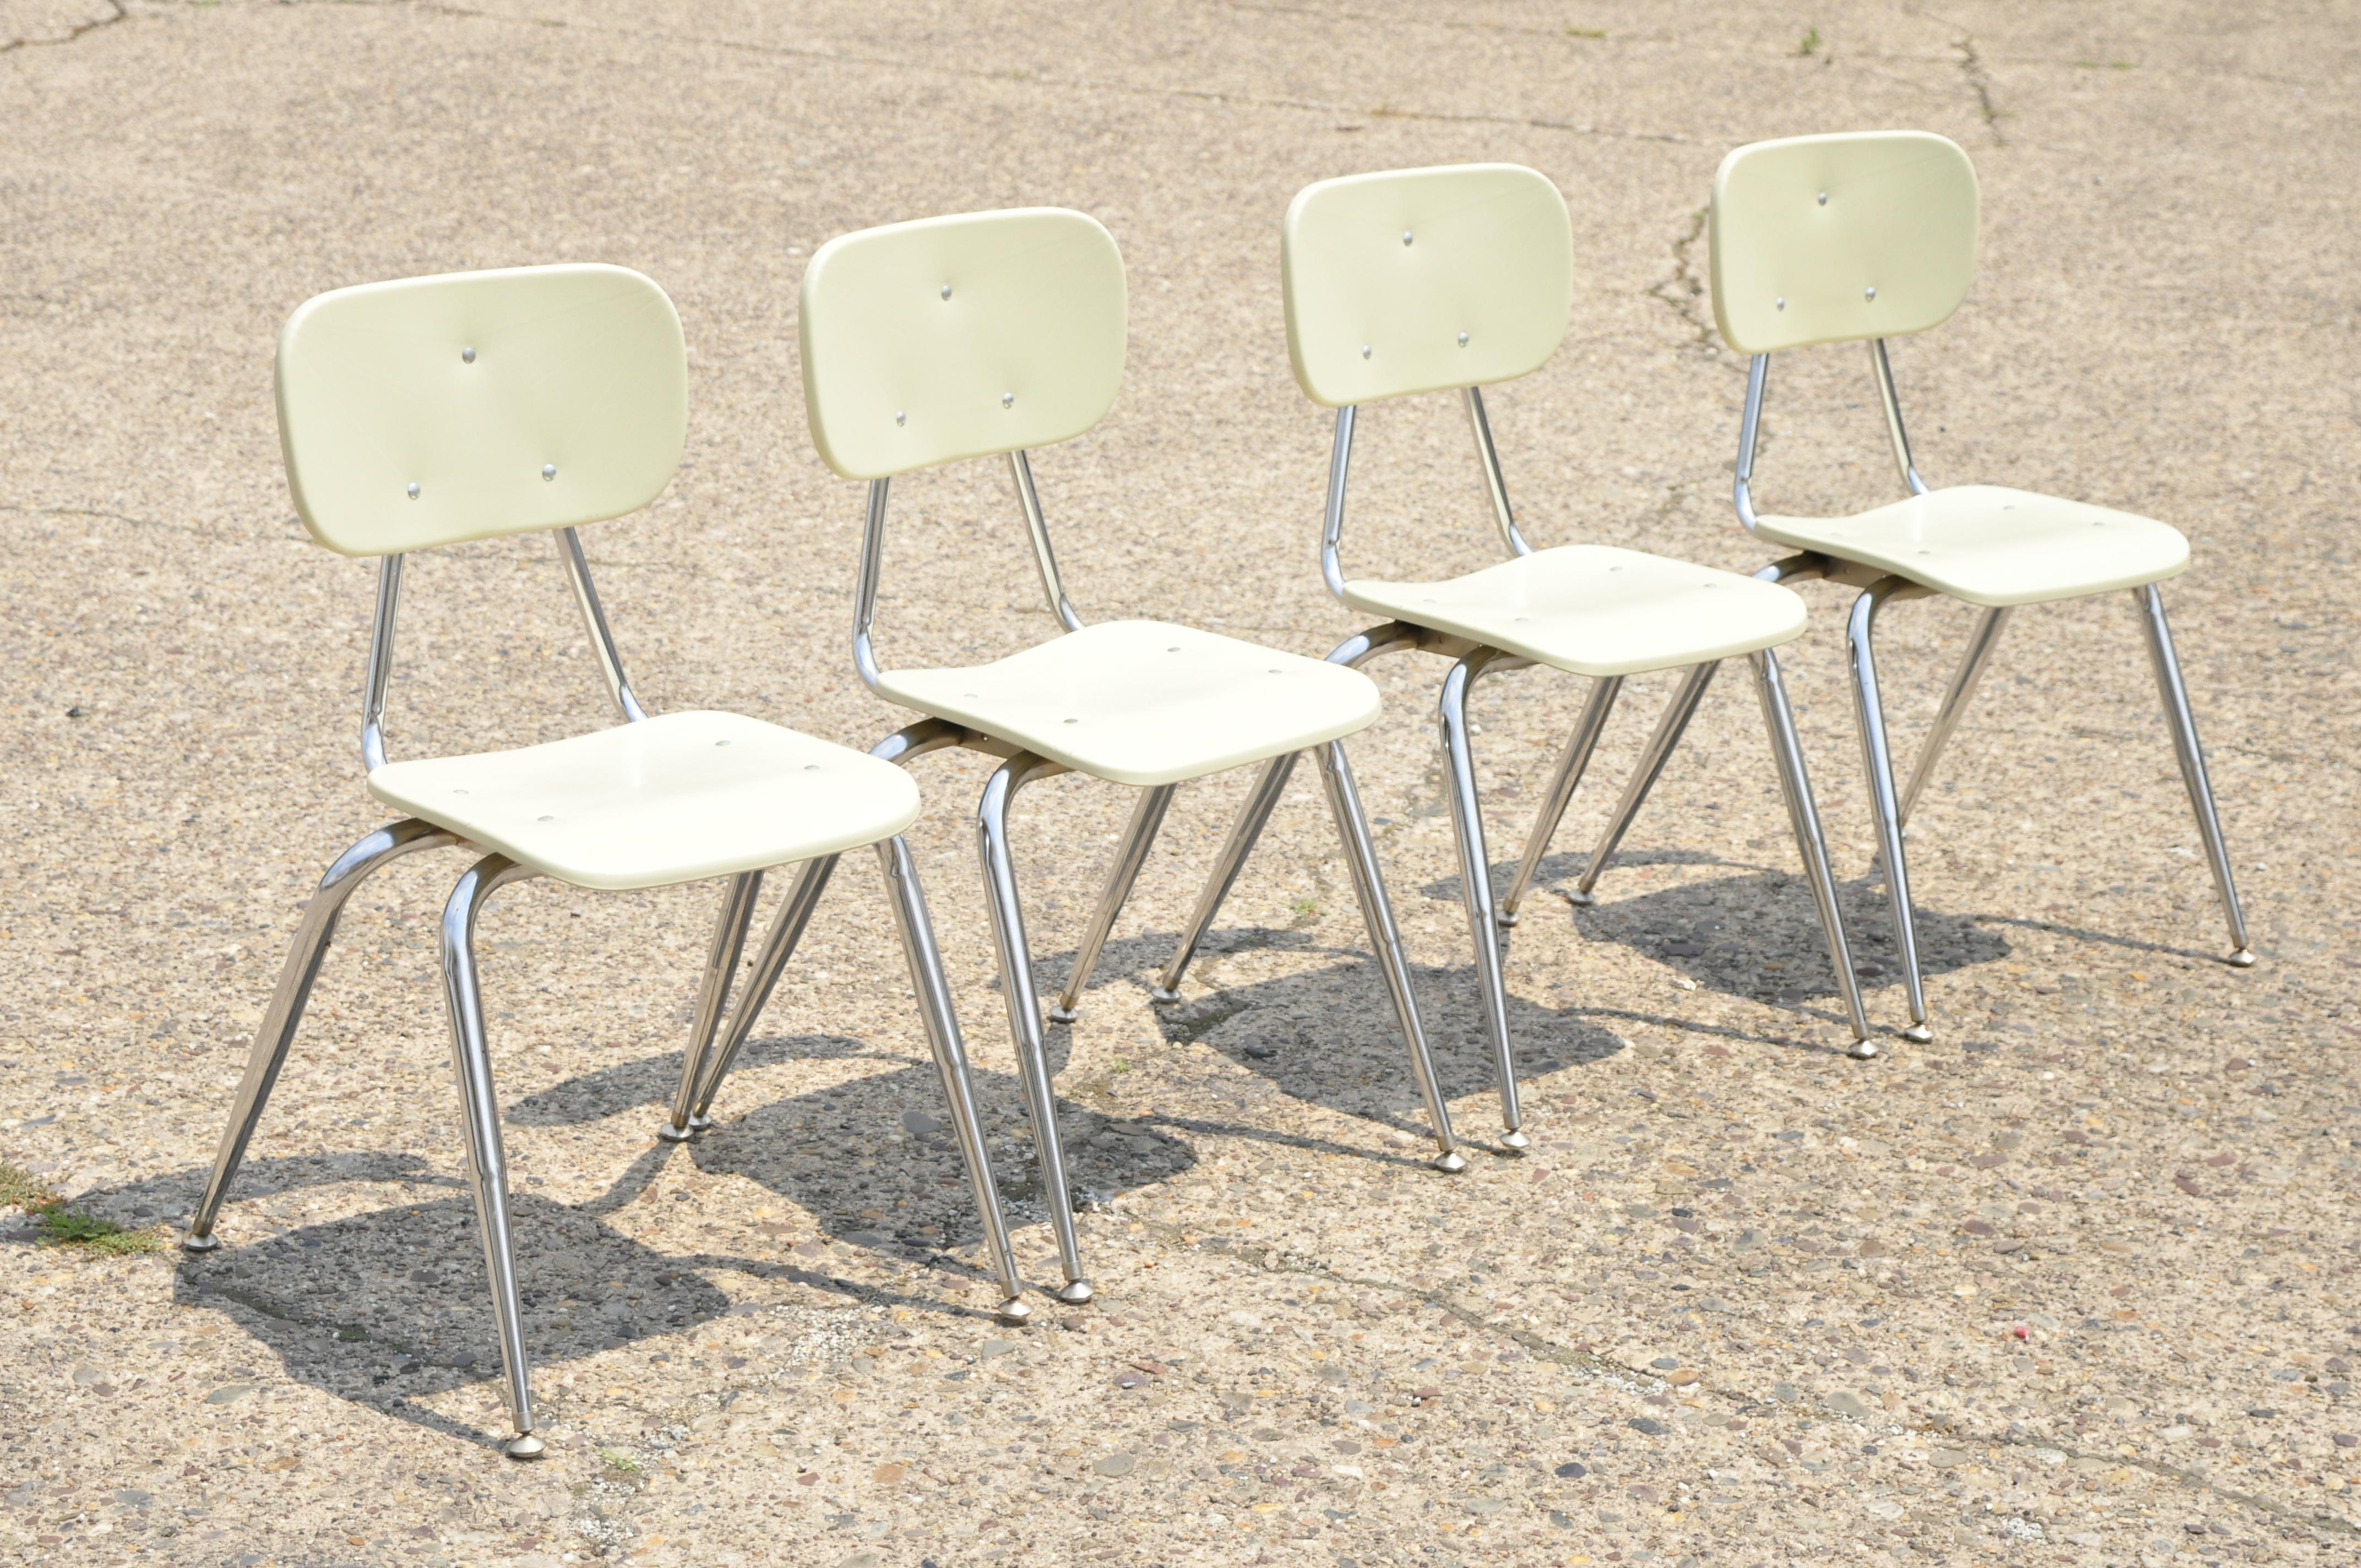 Vtg Beige Molded Plastic Chrome Metal Base Stacking School Side Chairs, Set of 4 For Sale 3